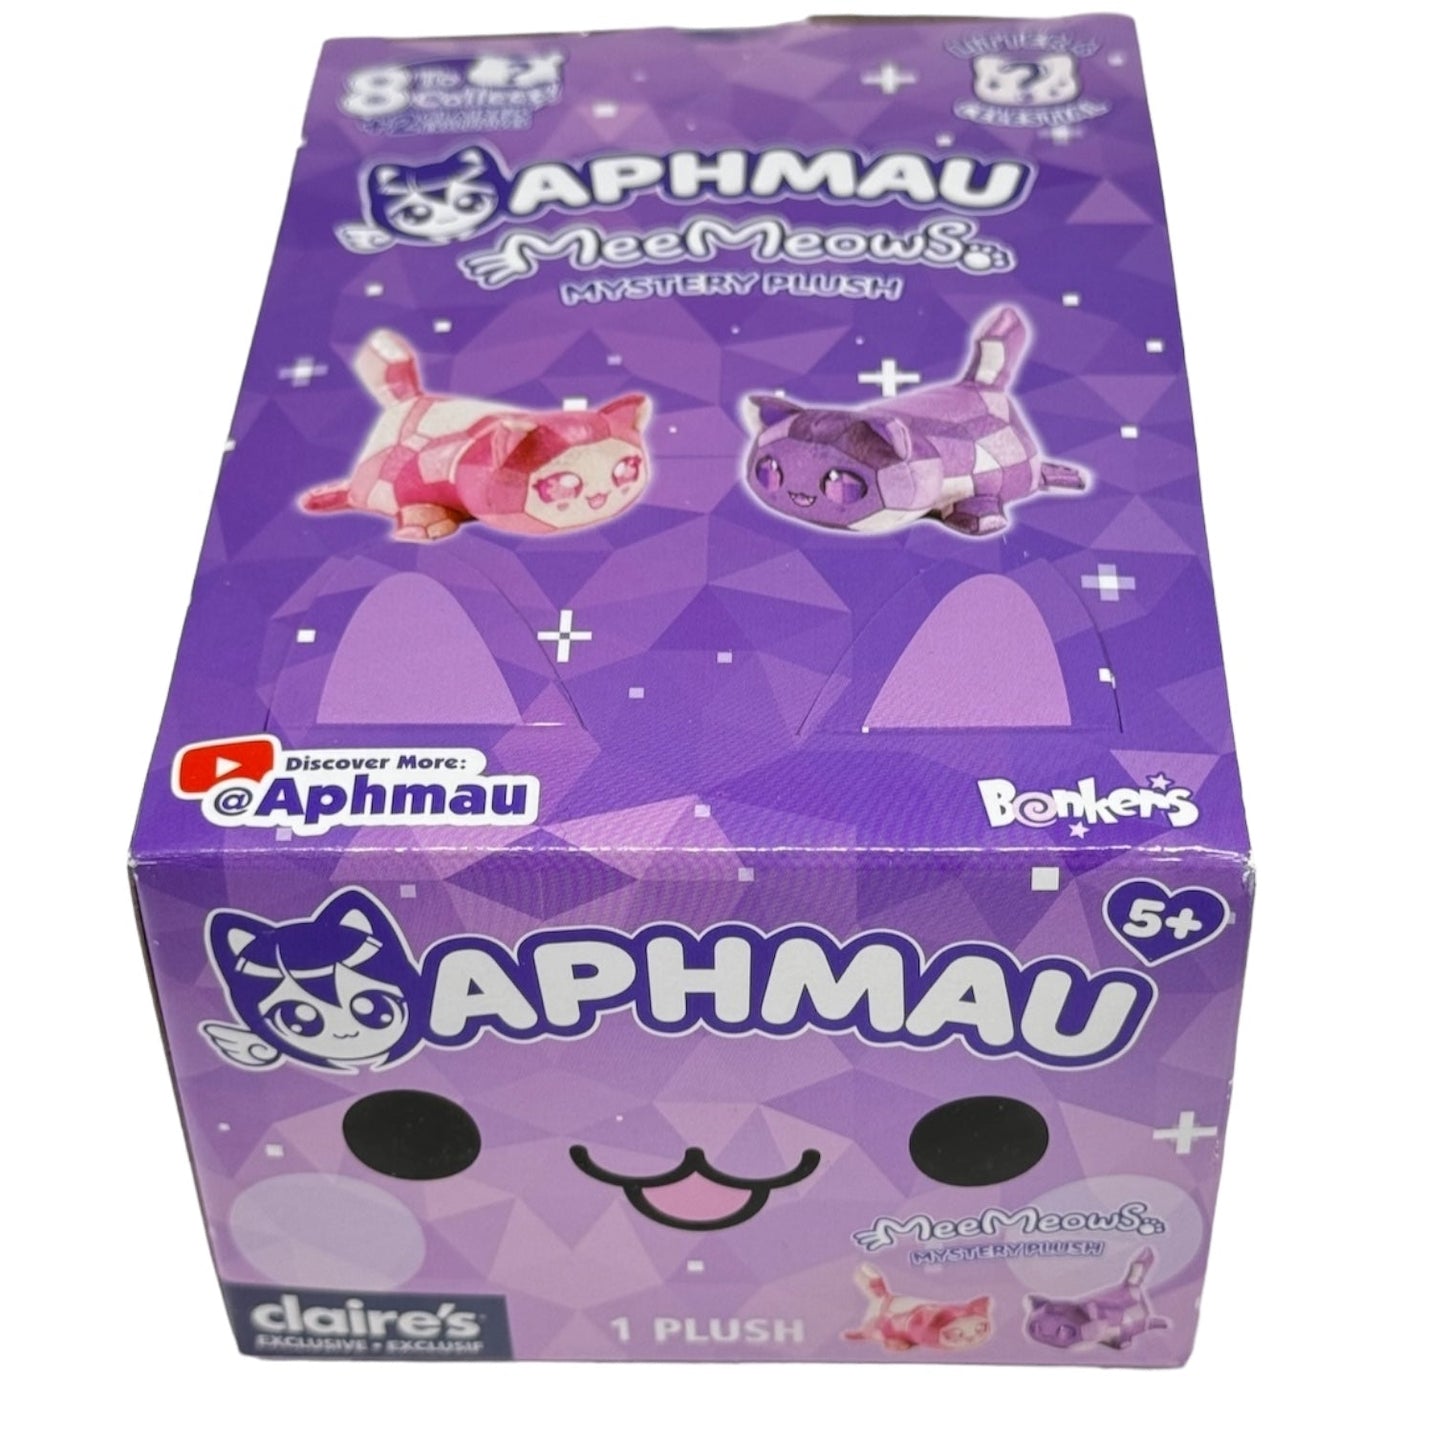 ROSE QUARTZ CAT - MeeMeows Litter 4 from Aphmau (NEW) HTF Claire's Exclusive!